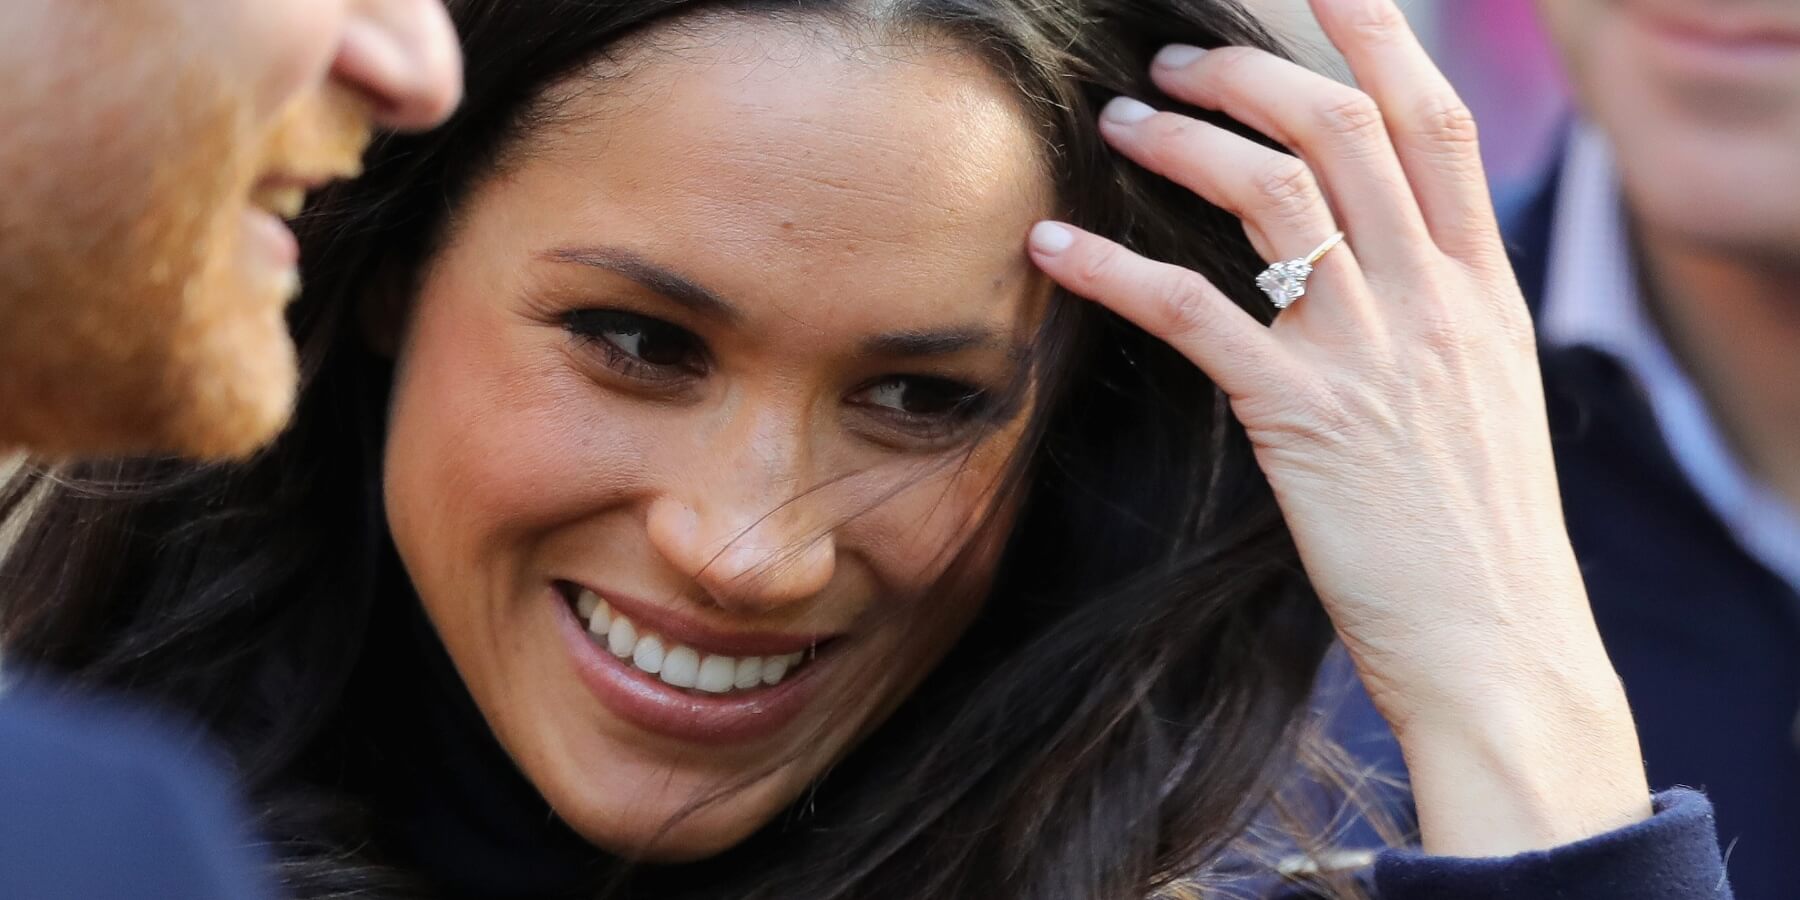 Meghan Markle shows off her engagement ring from Prince harry